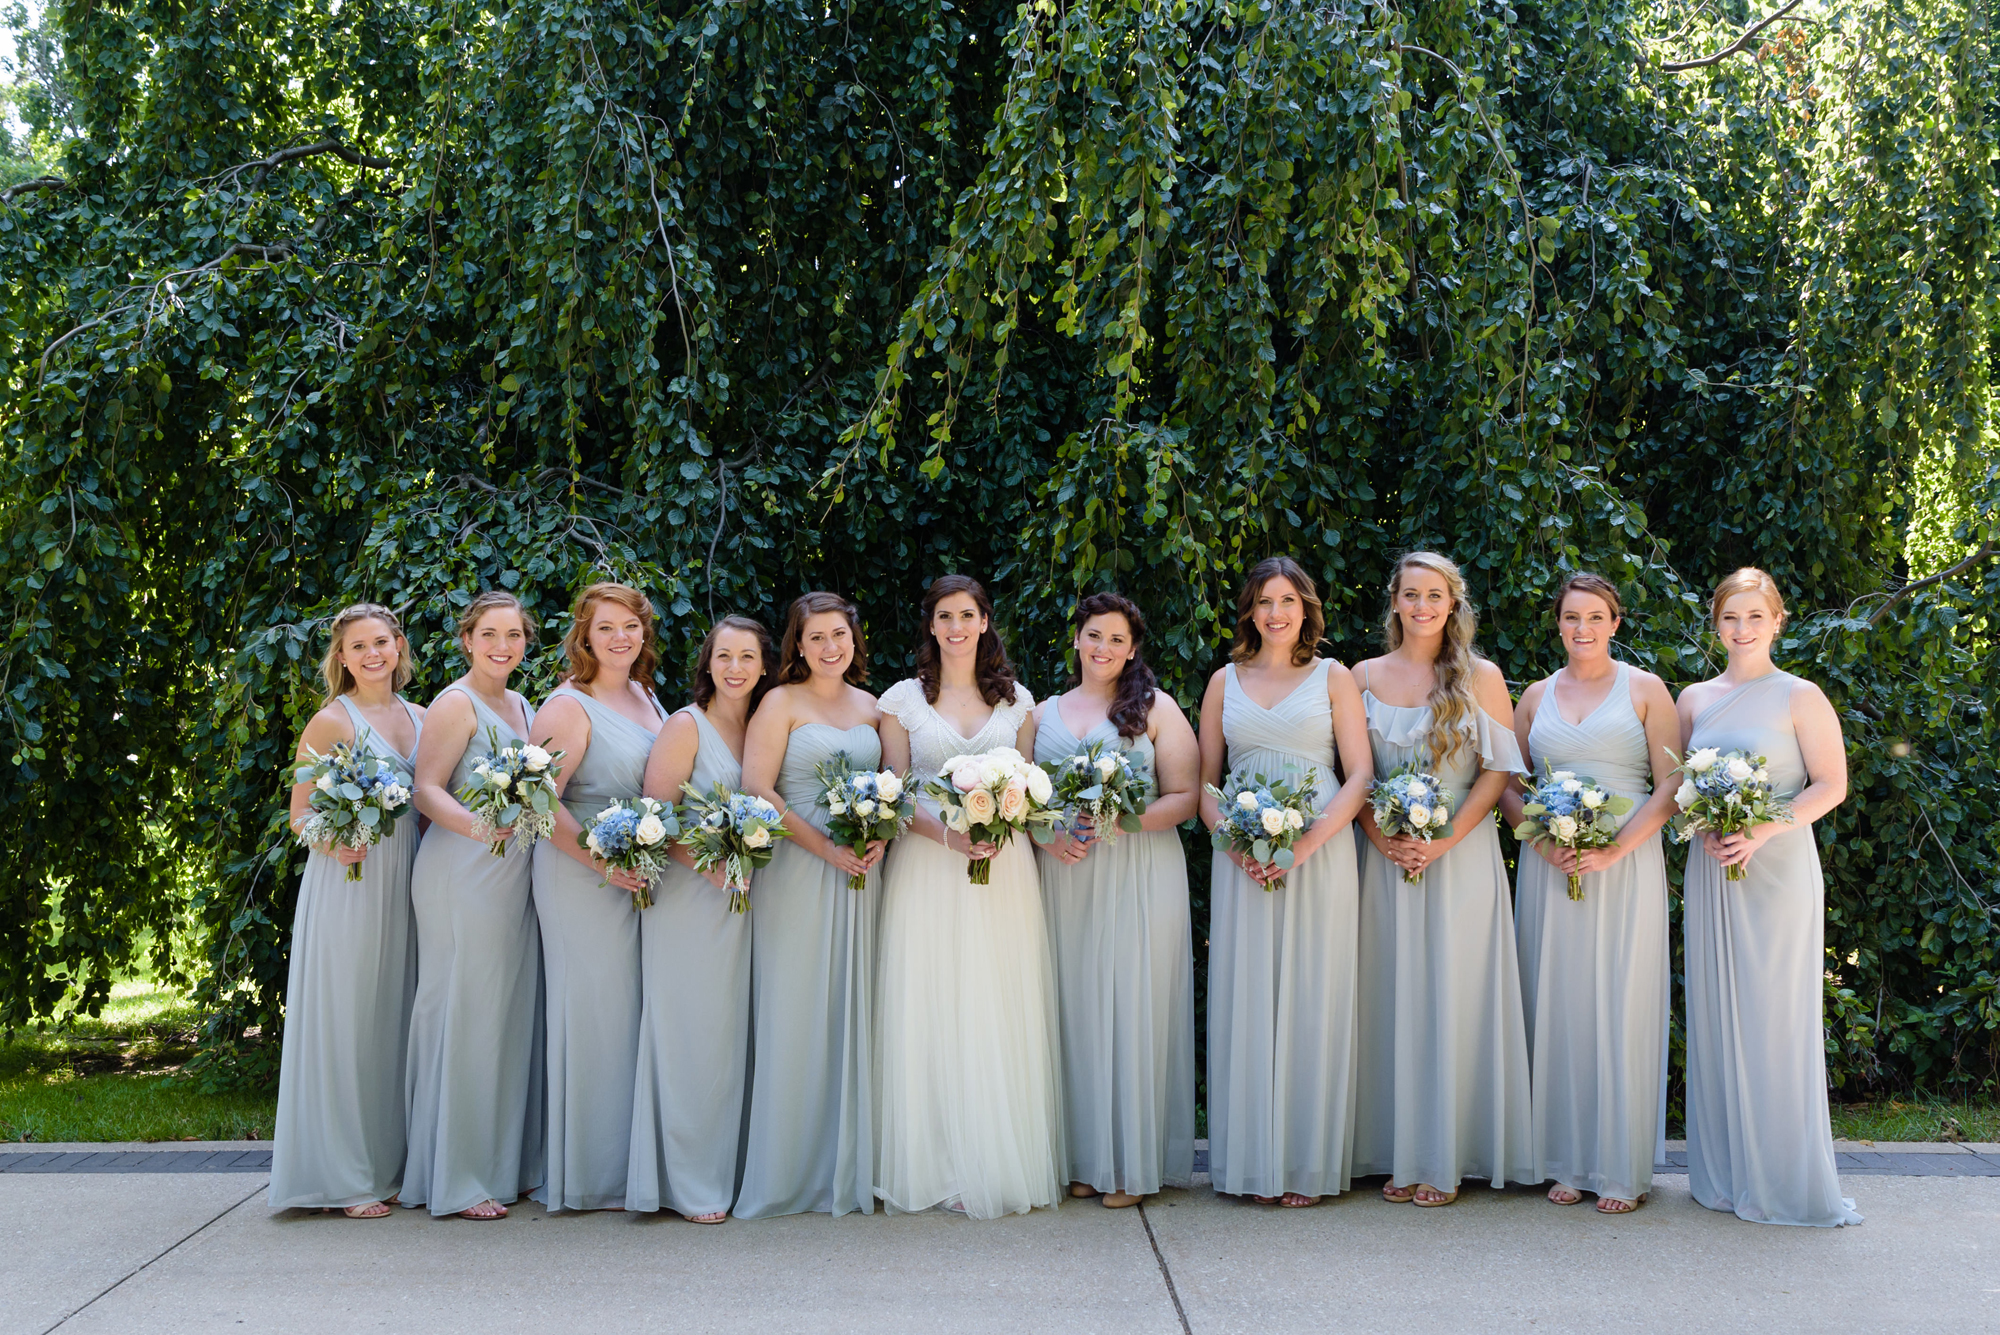 Bridesmaids in front of an exotic California inspired tree after a wedding ceremony at the Basilica of the Sacred Heart on the campus of the University of Notre Dame